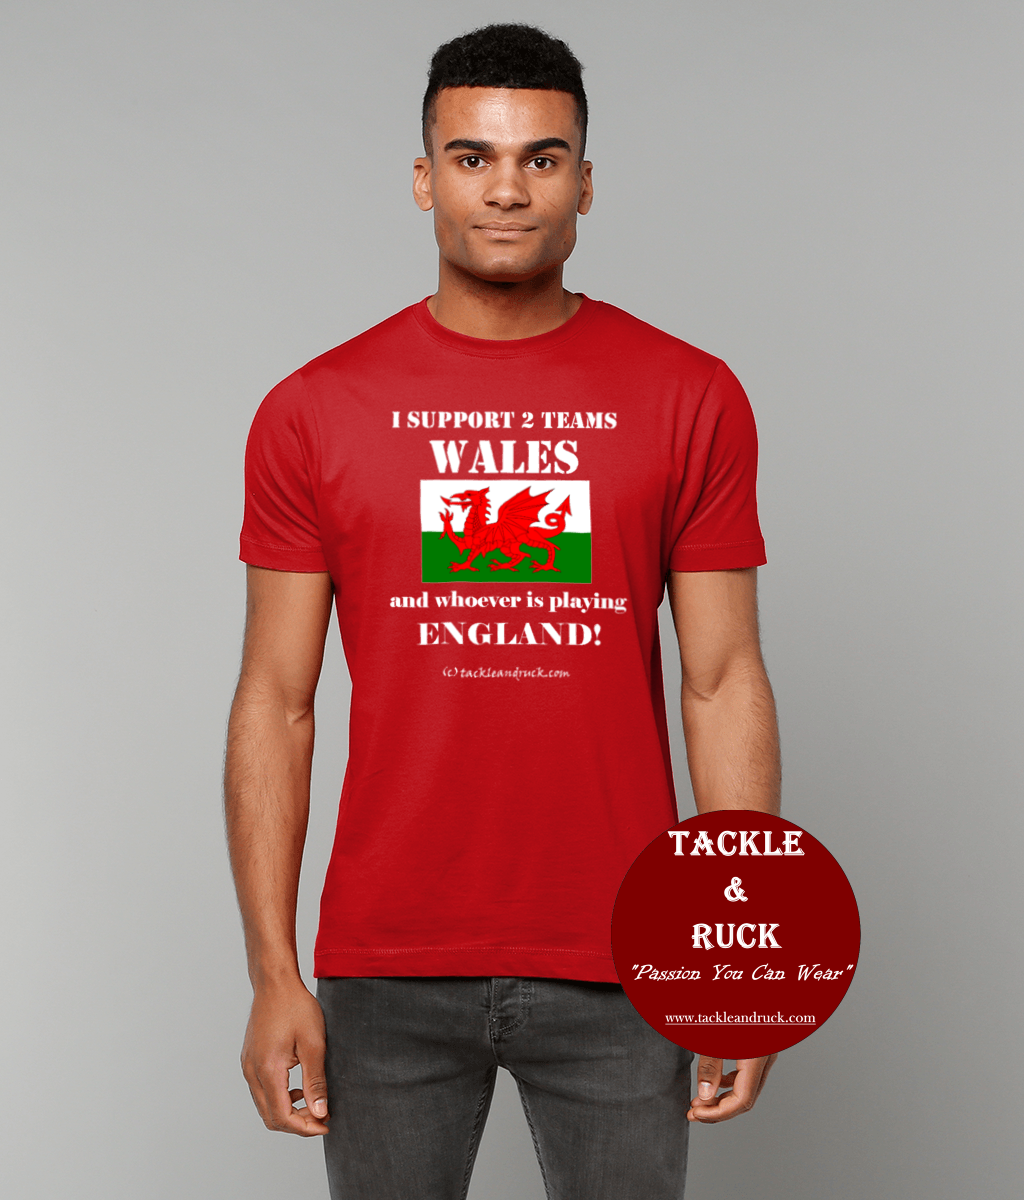 Tackle & Ruck - Wales welsh rugby t-shirts clothing gifts england fathers day